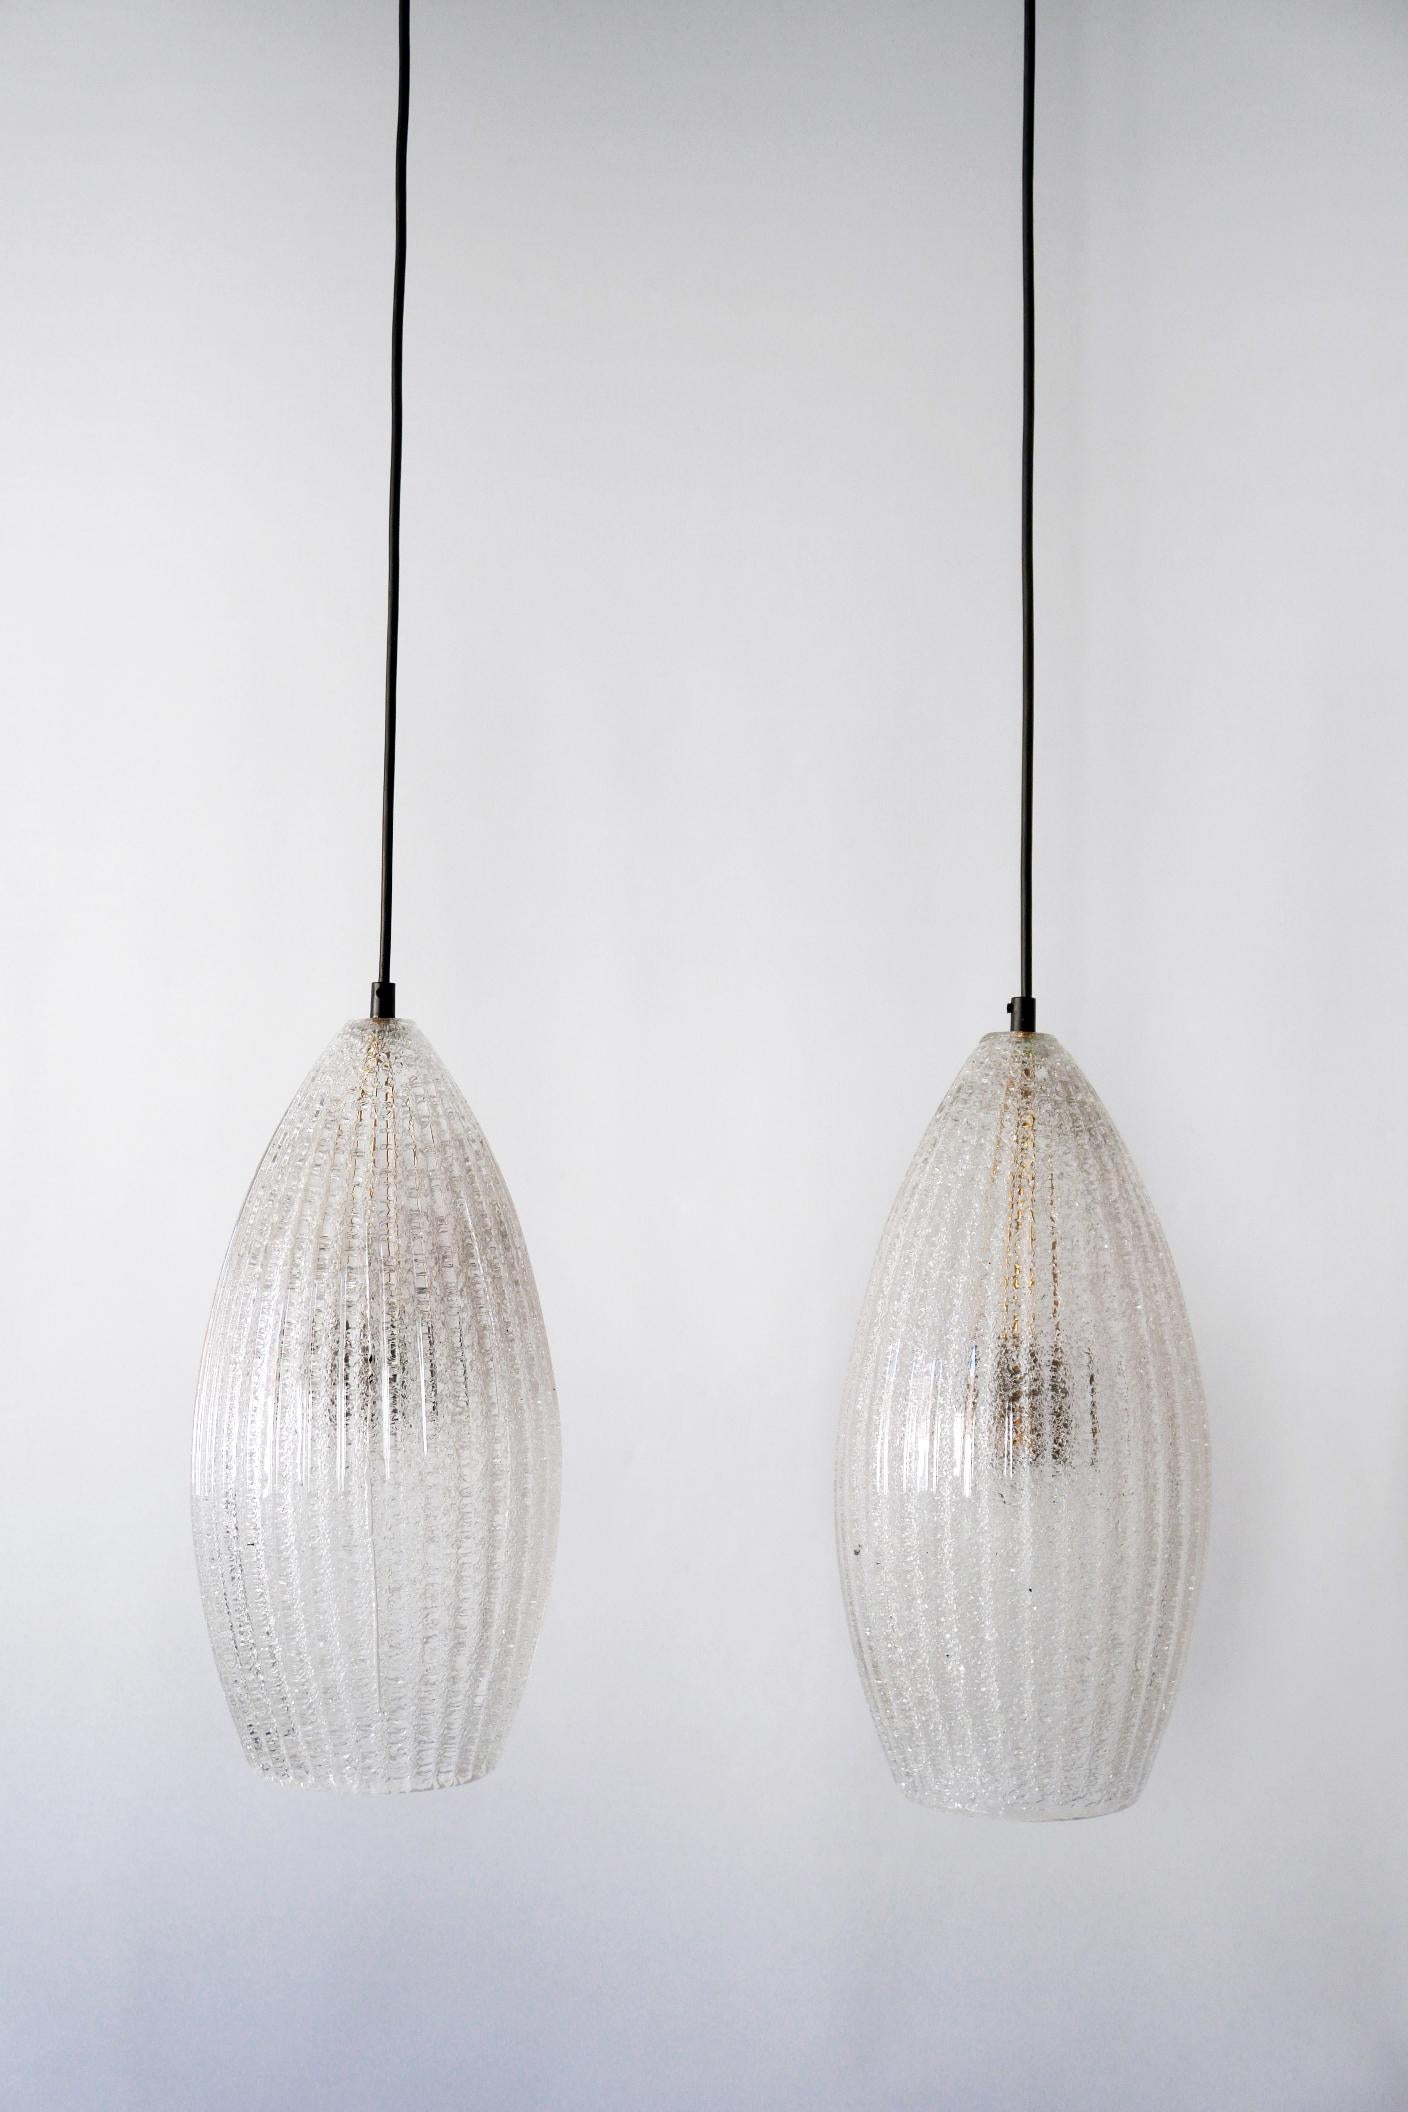 Set of Two Mid-Century Modern Textured Glass Pendant Lamps, 1960s, Germany For Sale 6